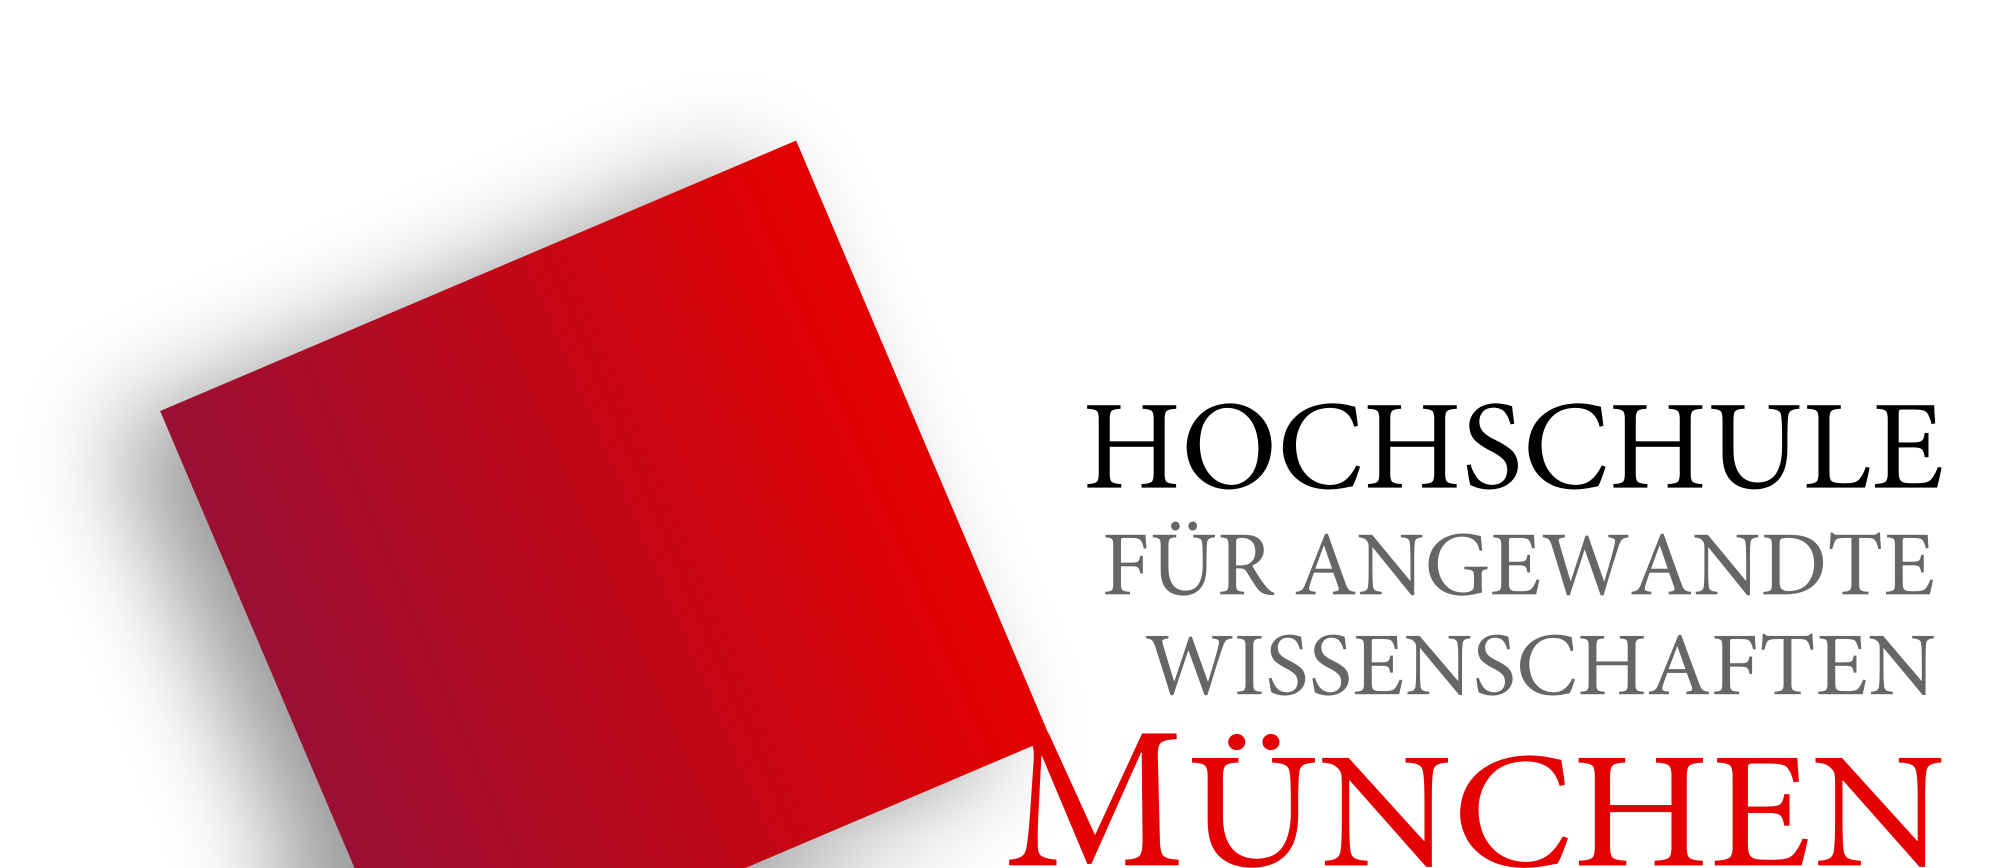 2000px-Hochschule_Muenchen_Logo.svg.png